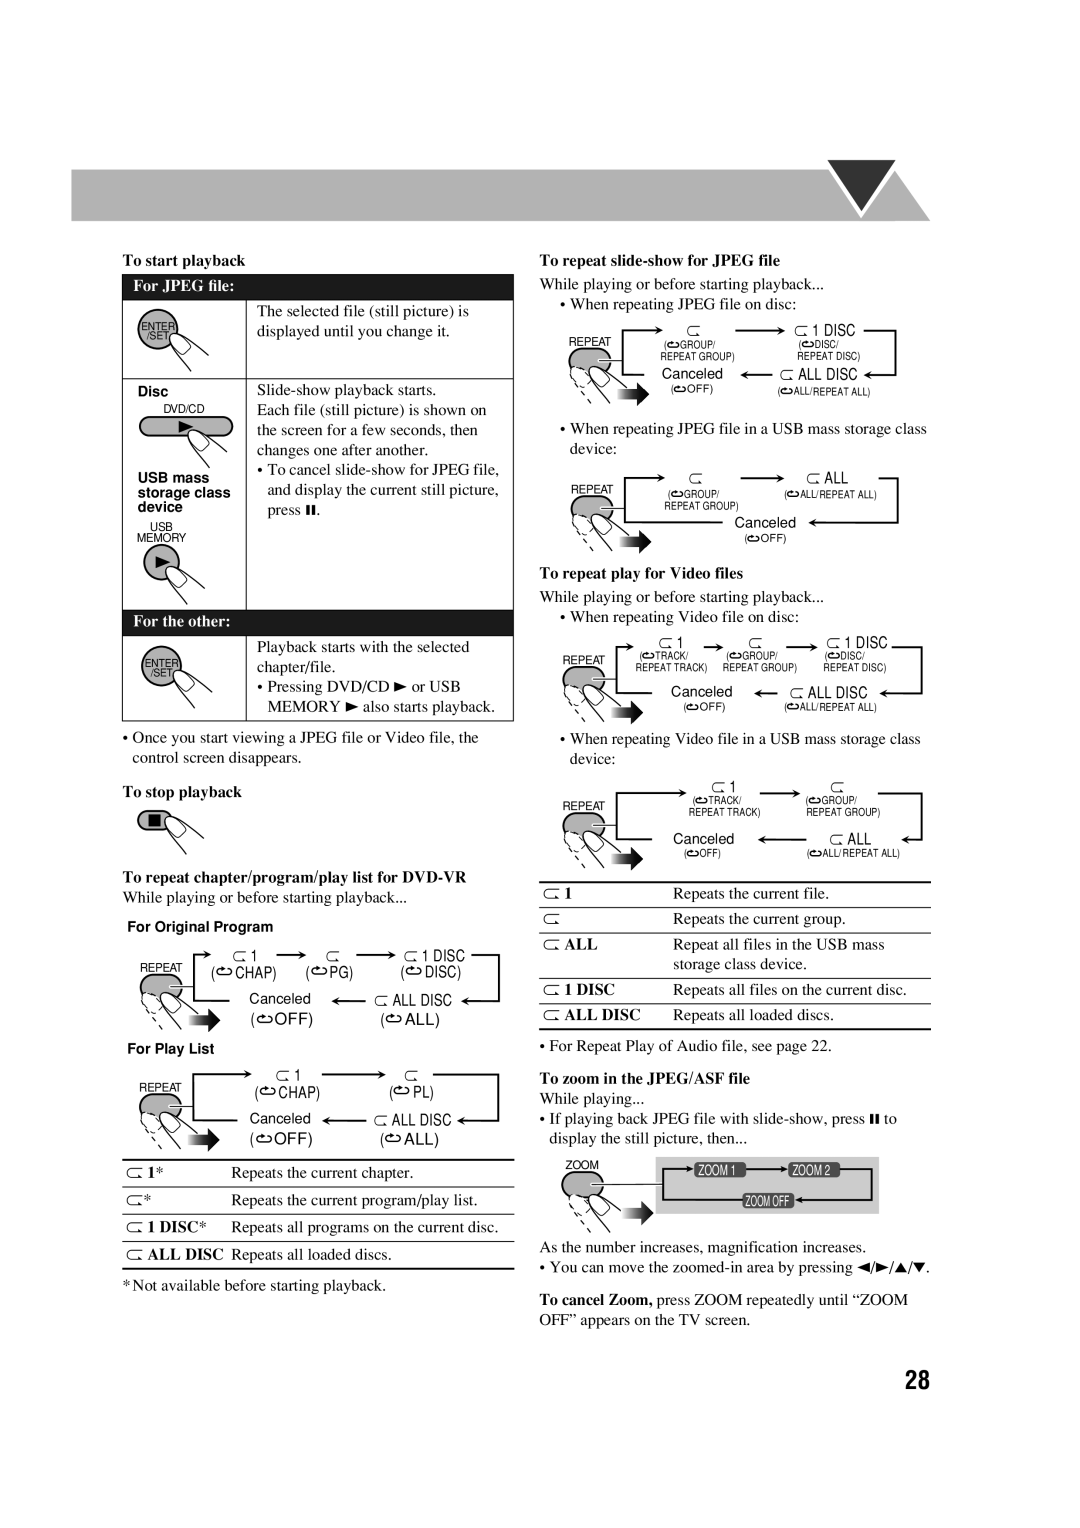 JVC CA-DXU8 manual To start playback, To stop playback To repeat chapter/program/play list for DVD-VR, P 1 DISC, P All Disc 